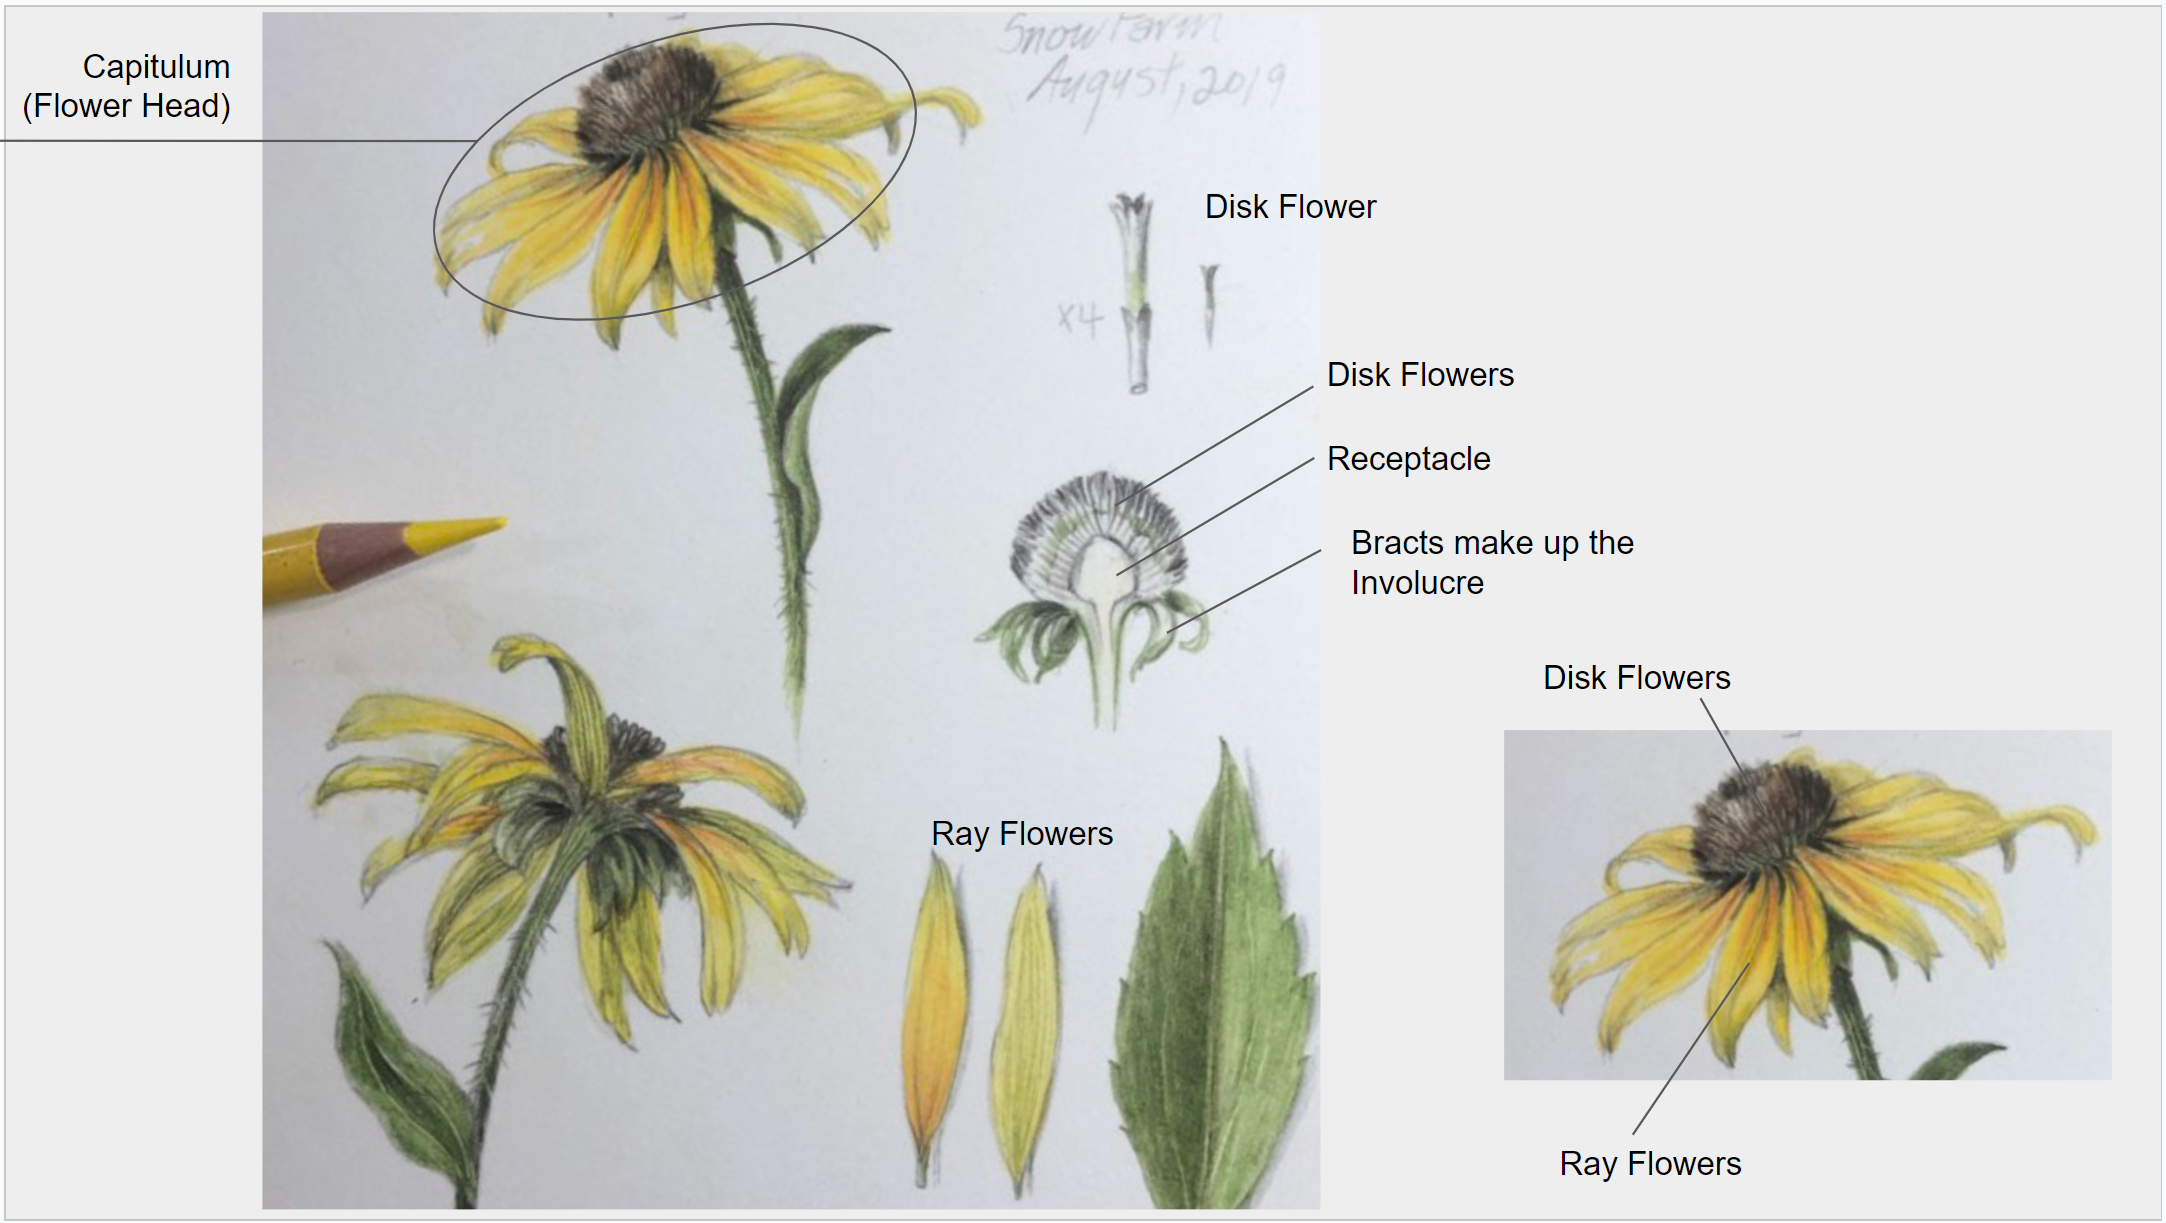 Botany Explained - Know Different Types of Flowers